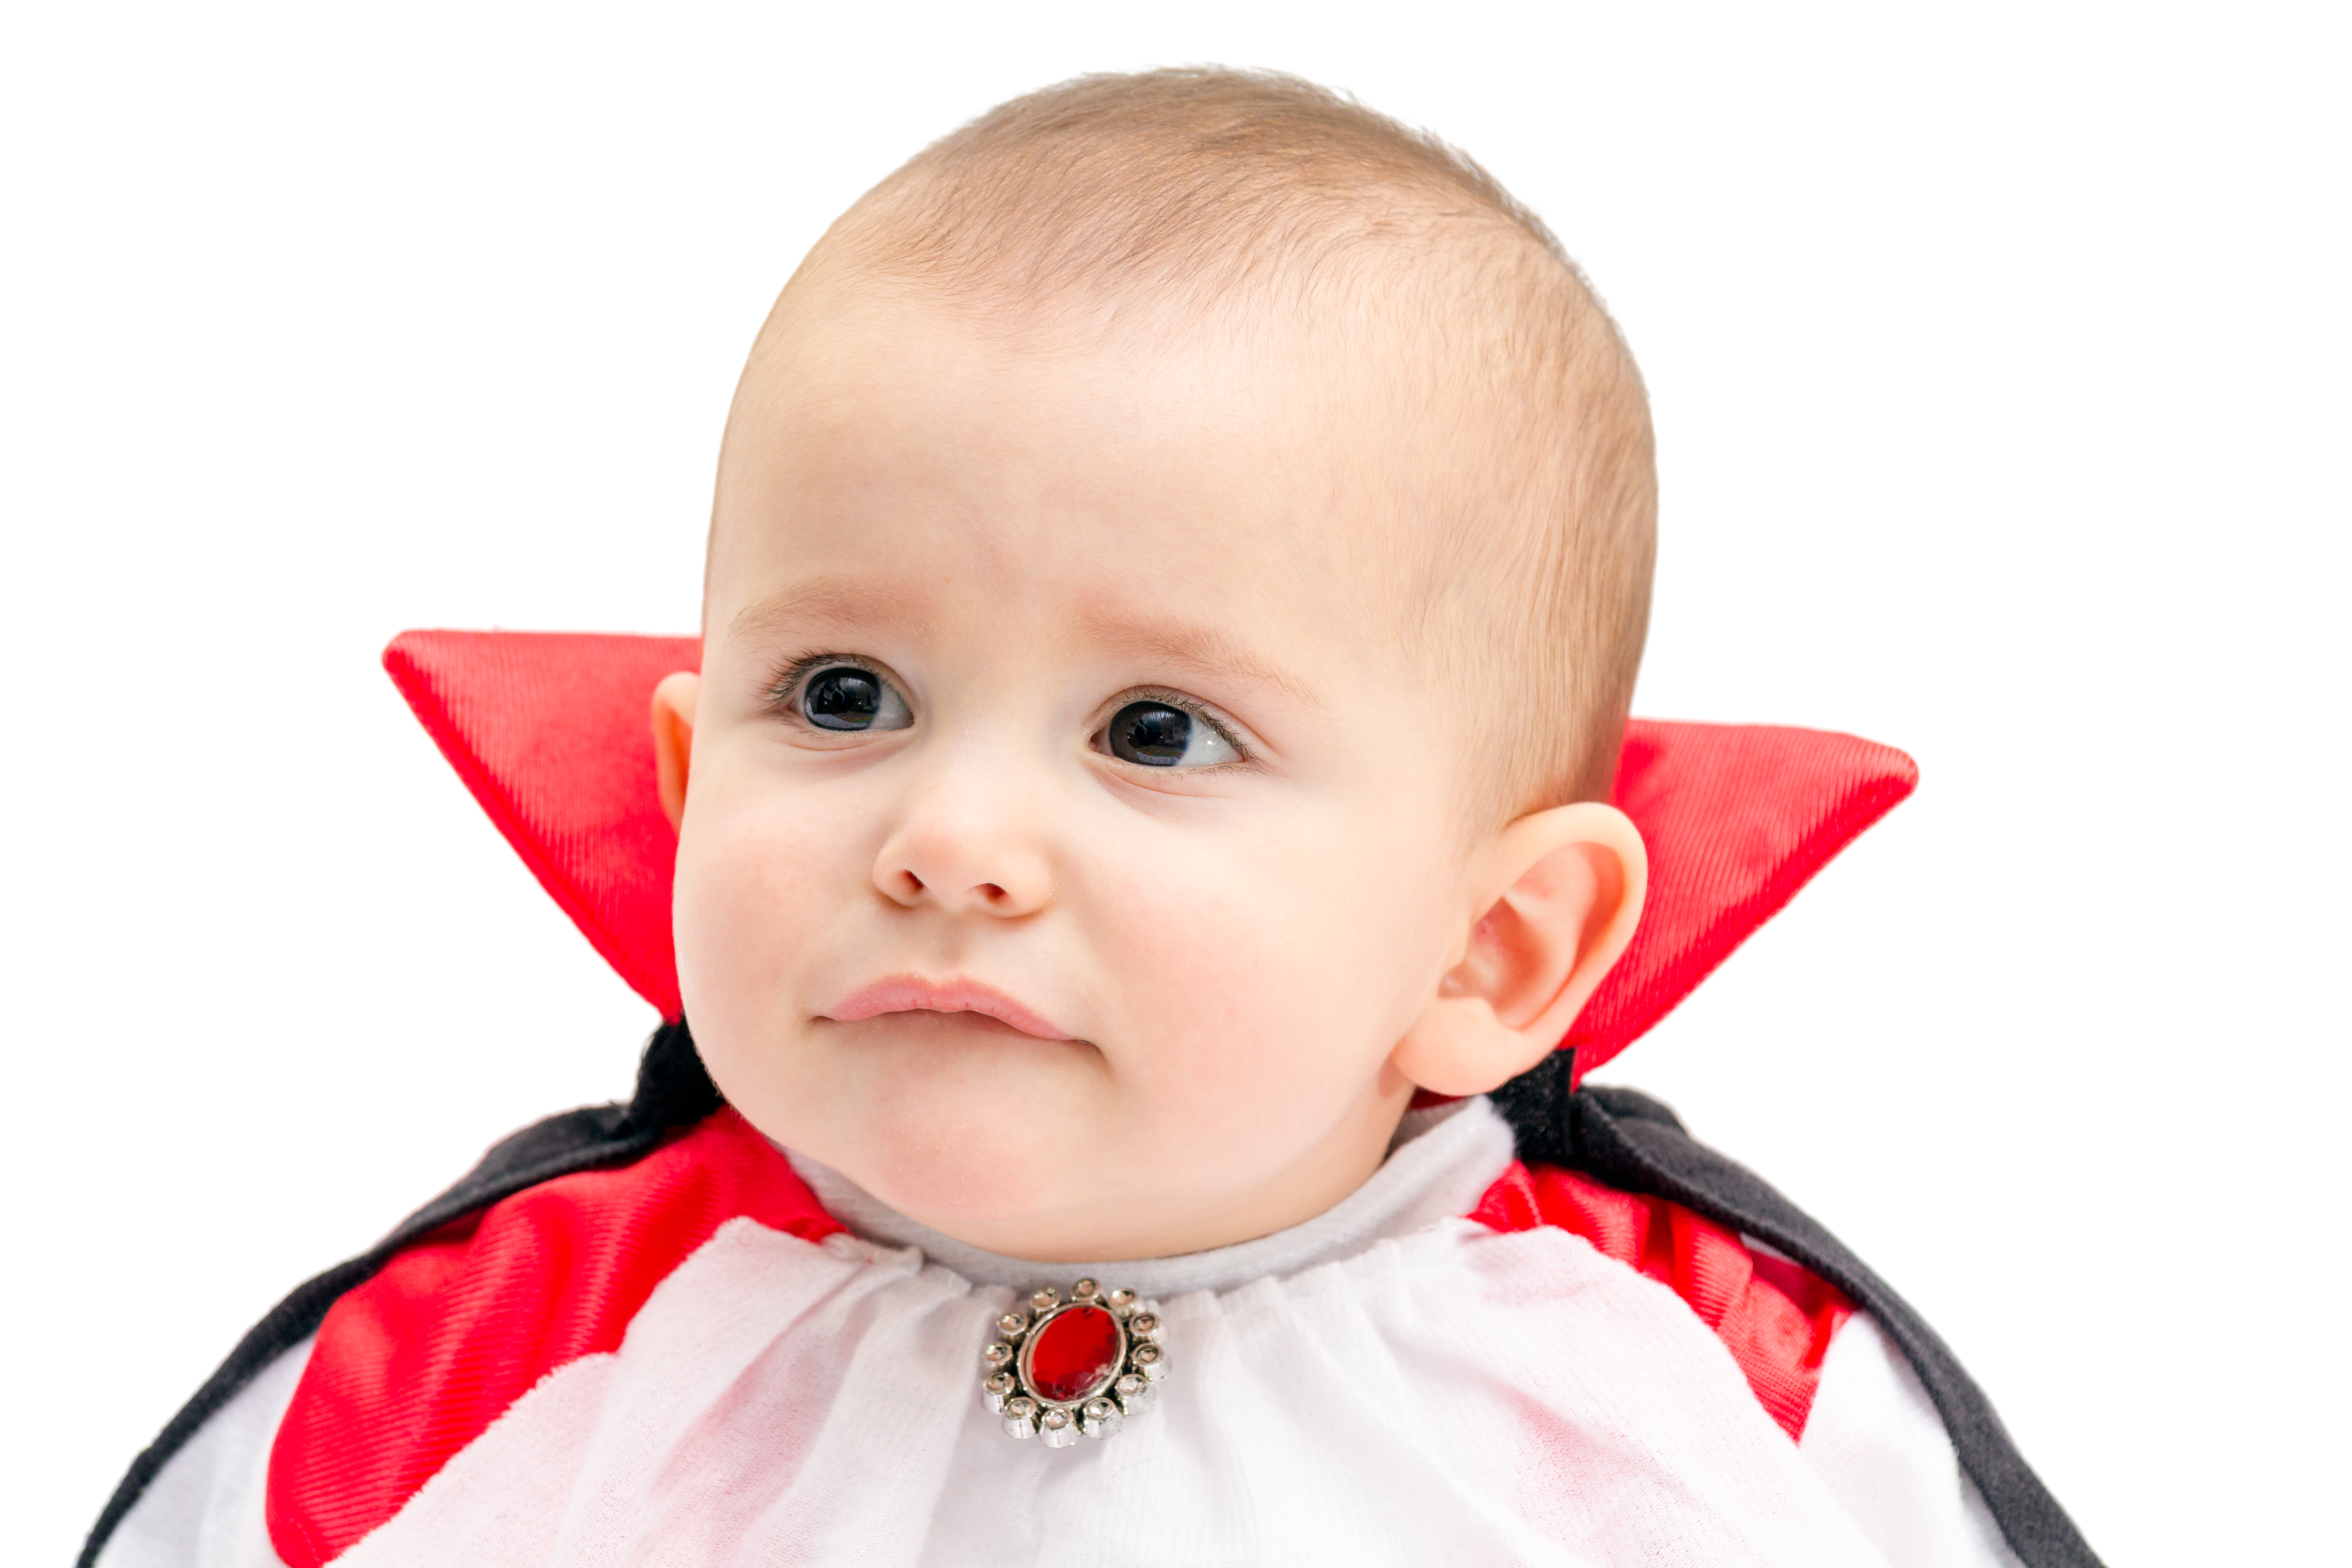 Meath mum shocked to find her baby had sprouted a vampire fang overnight